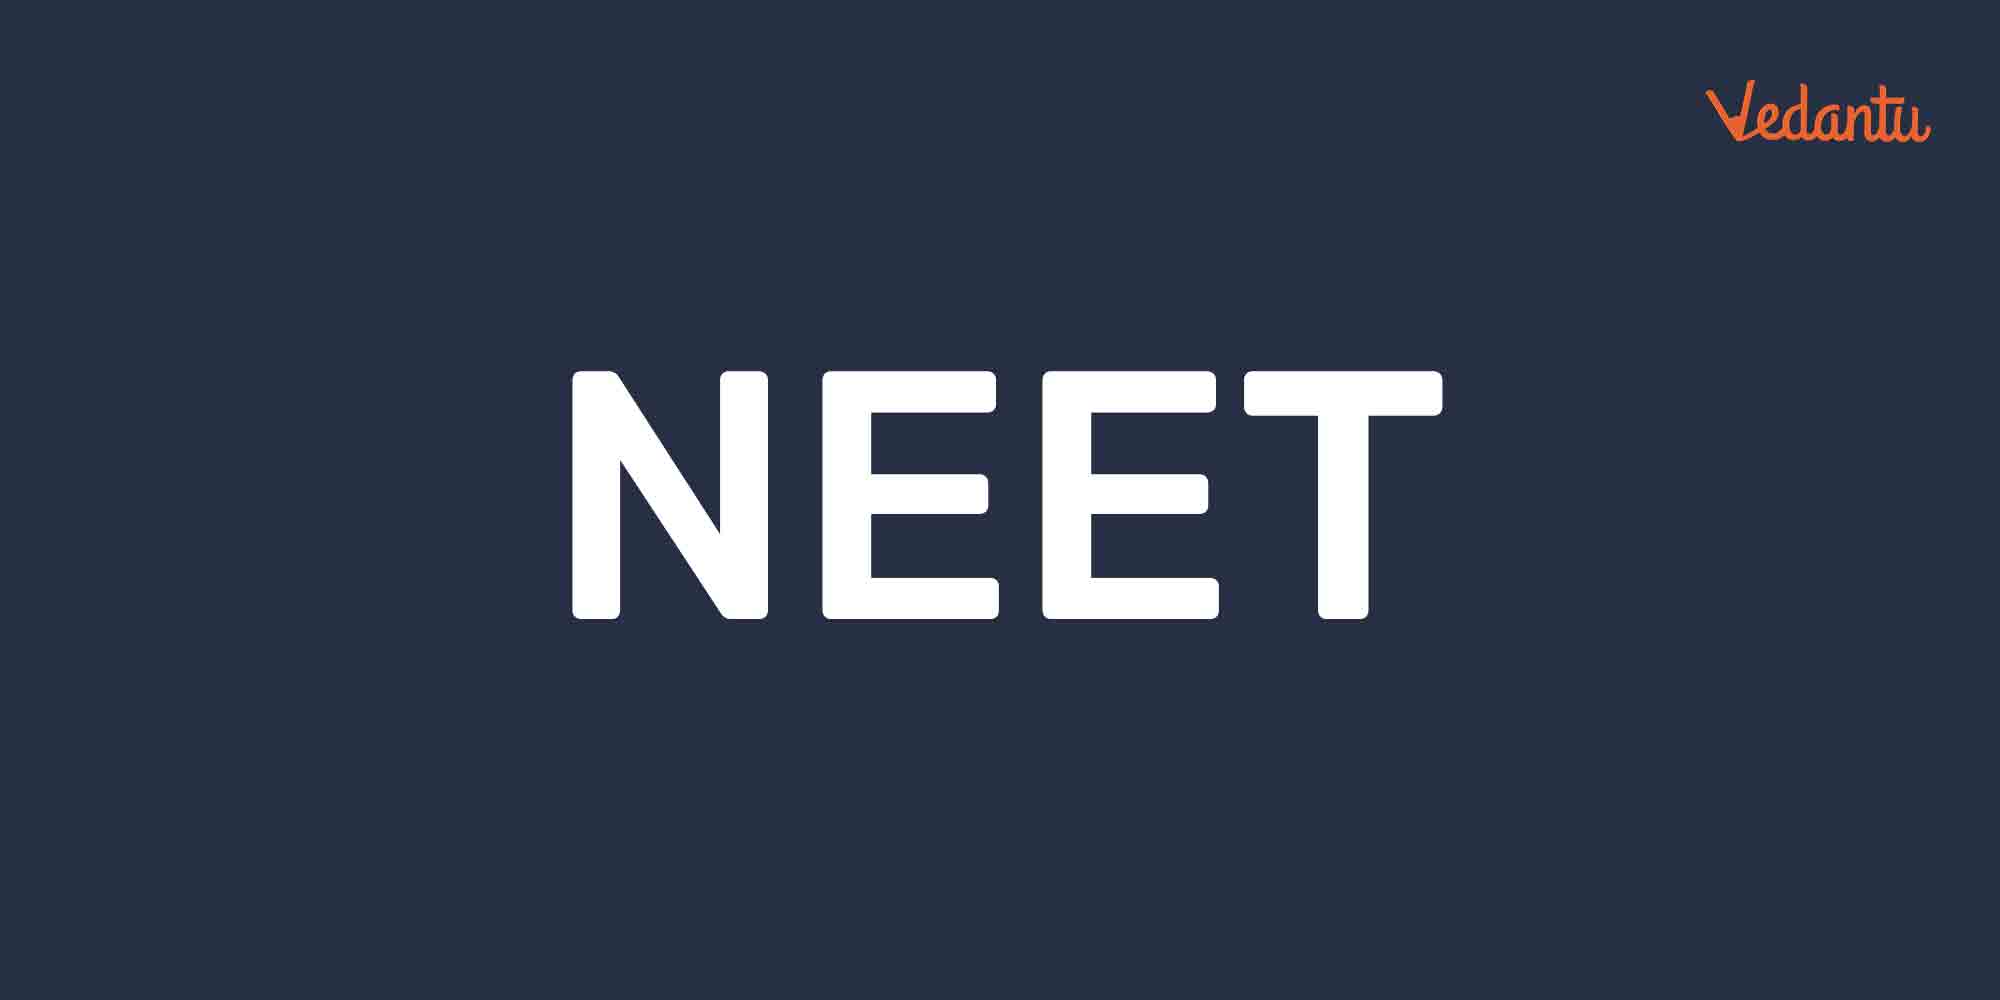 How Do I Study For NEET When Only 100 Days Are Left?